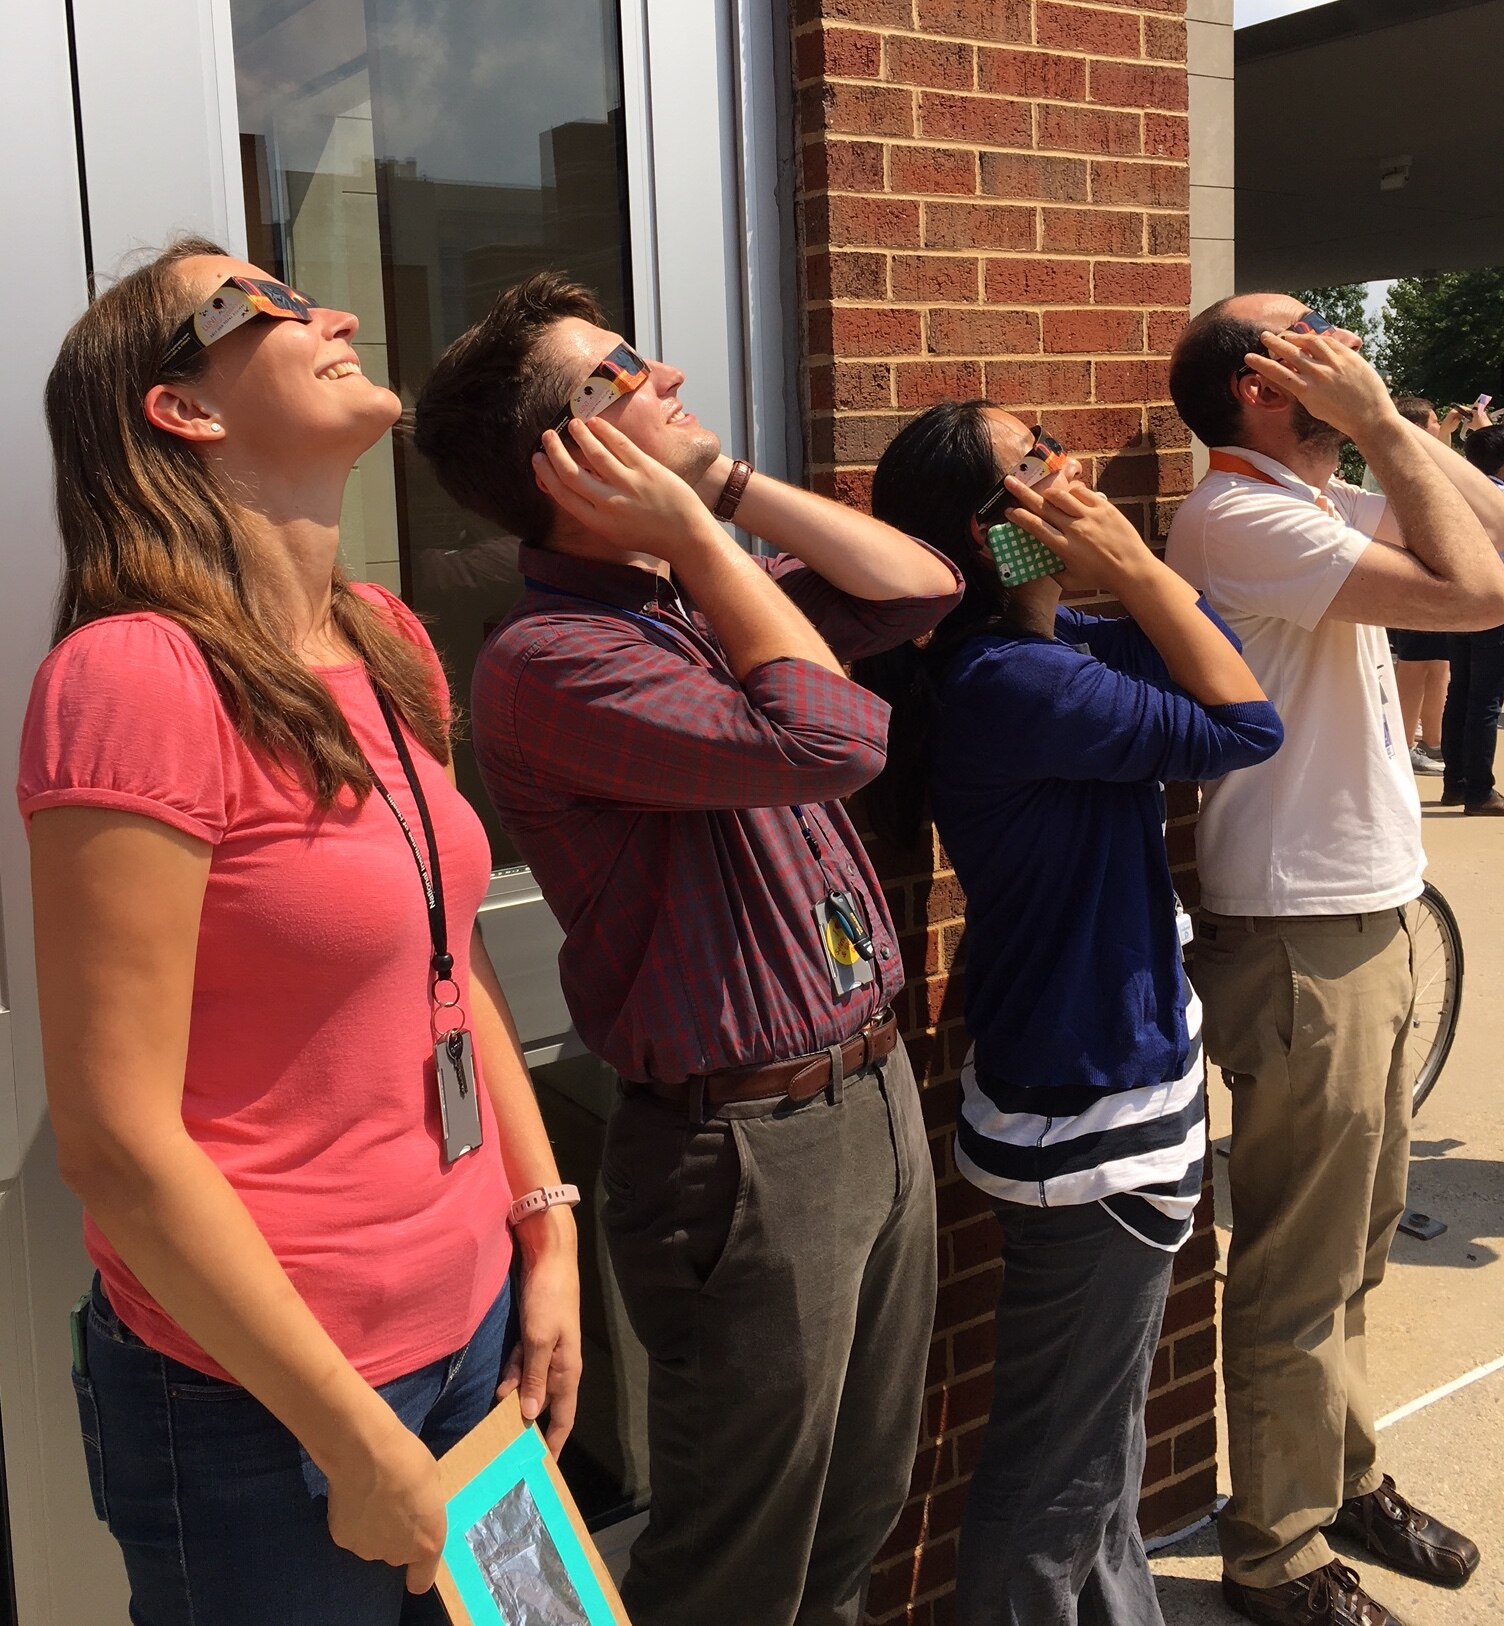 Lab members looking at a solar eclipse.